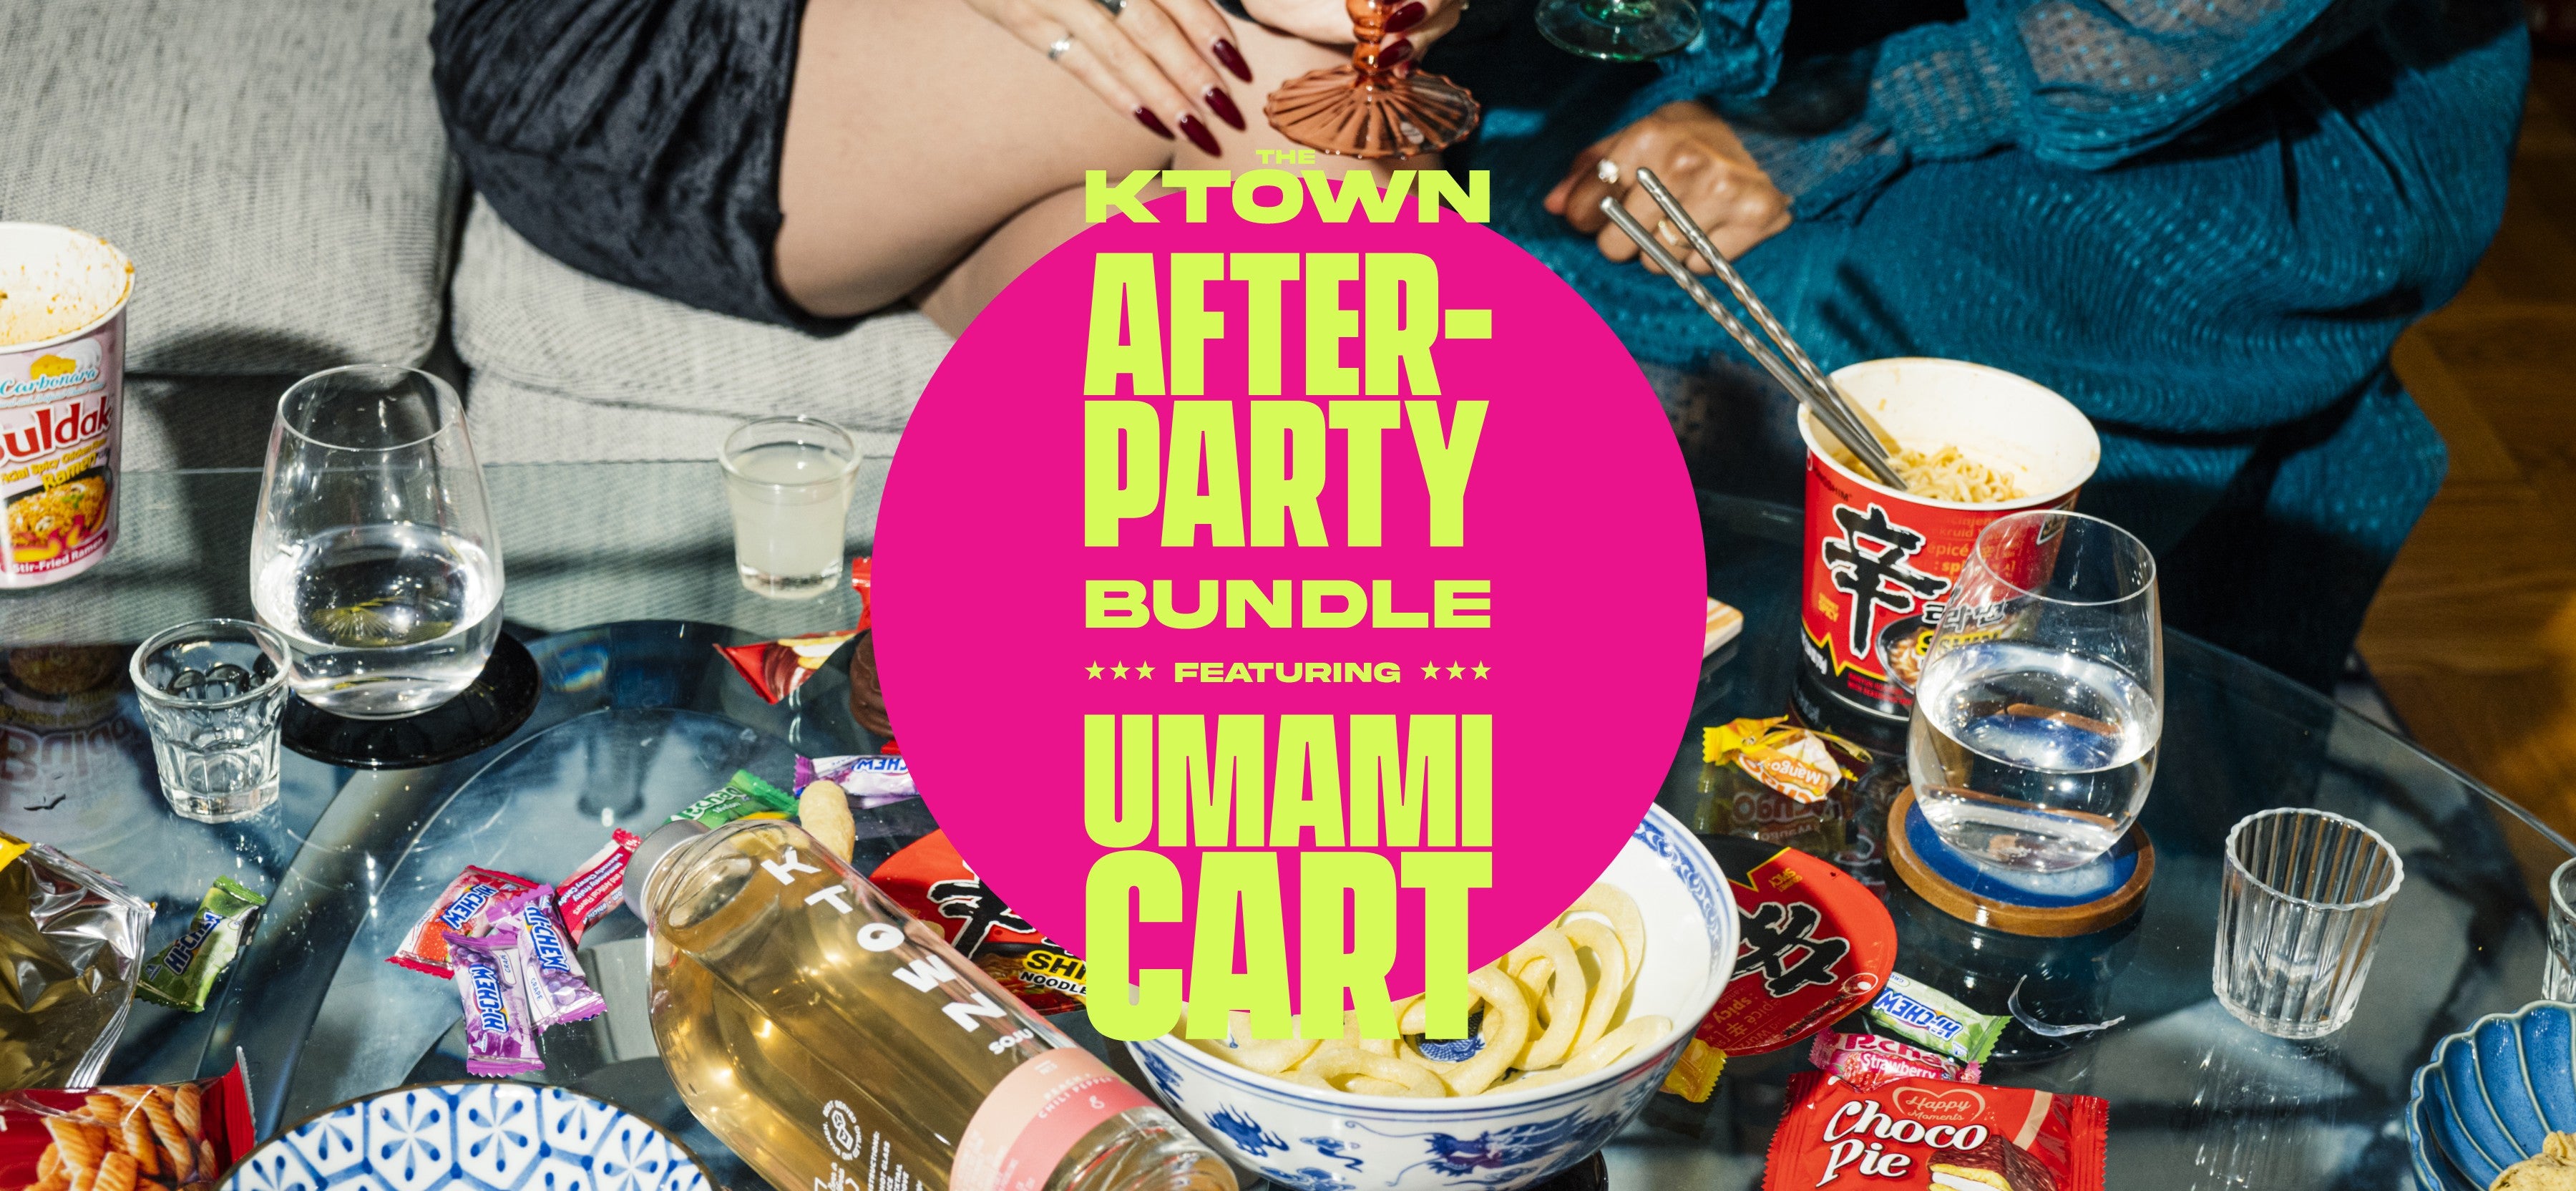 Afterparty Bundle by Yobo & Umamicart